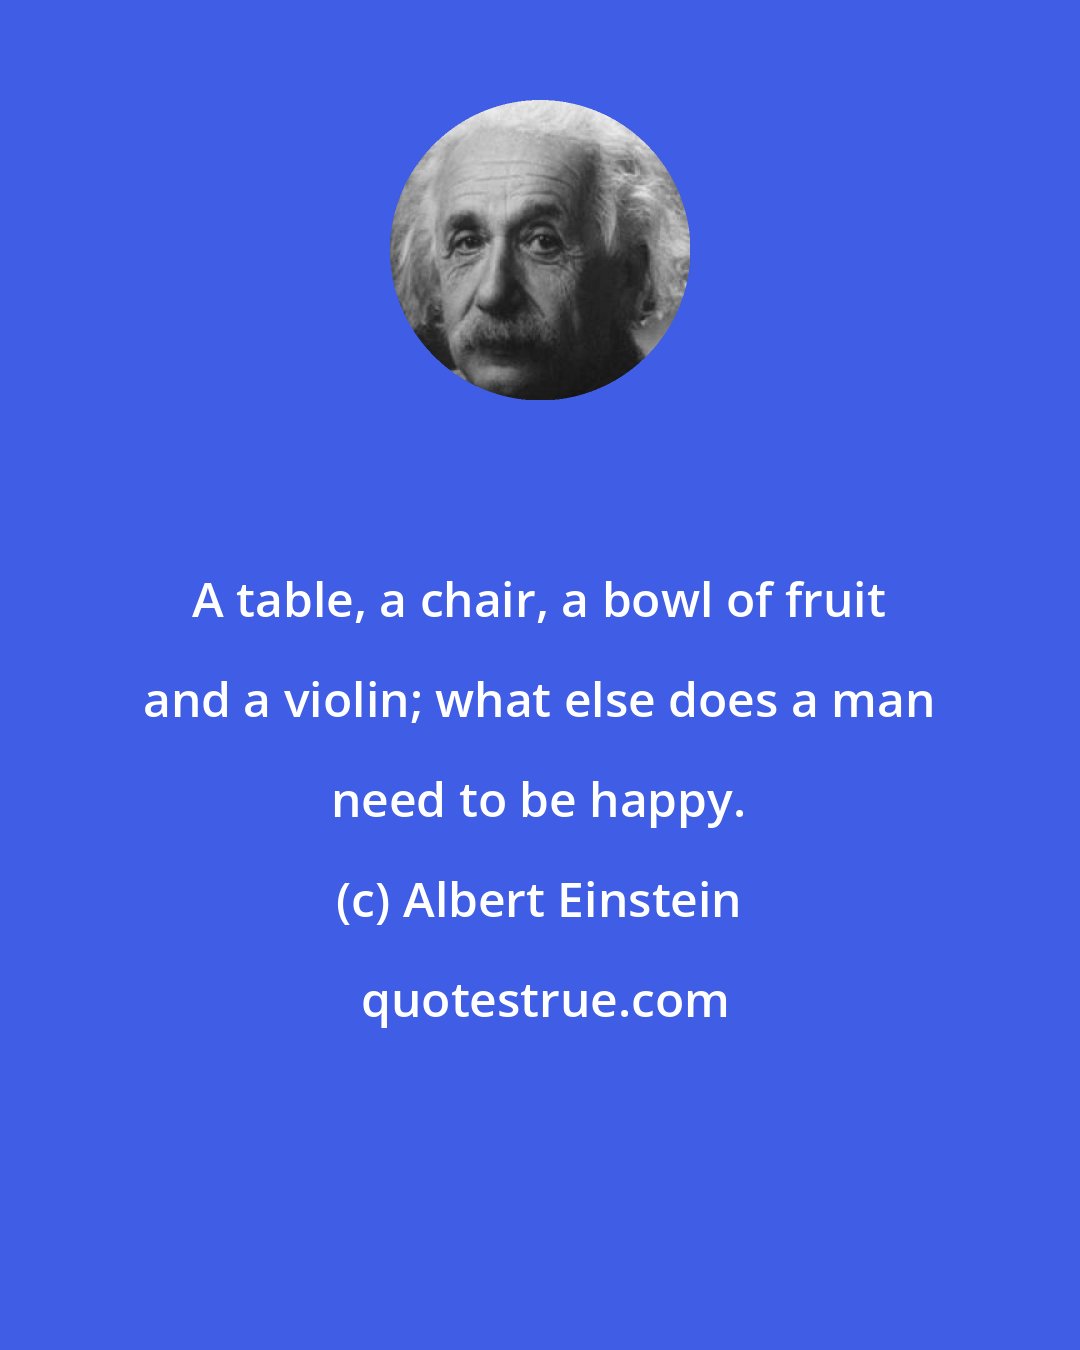 Albert Einstein: A table, a chair, a bowl of fruit and a violin; what else does a man need to be happy.